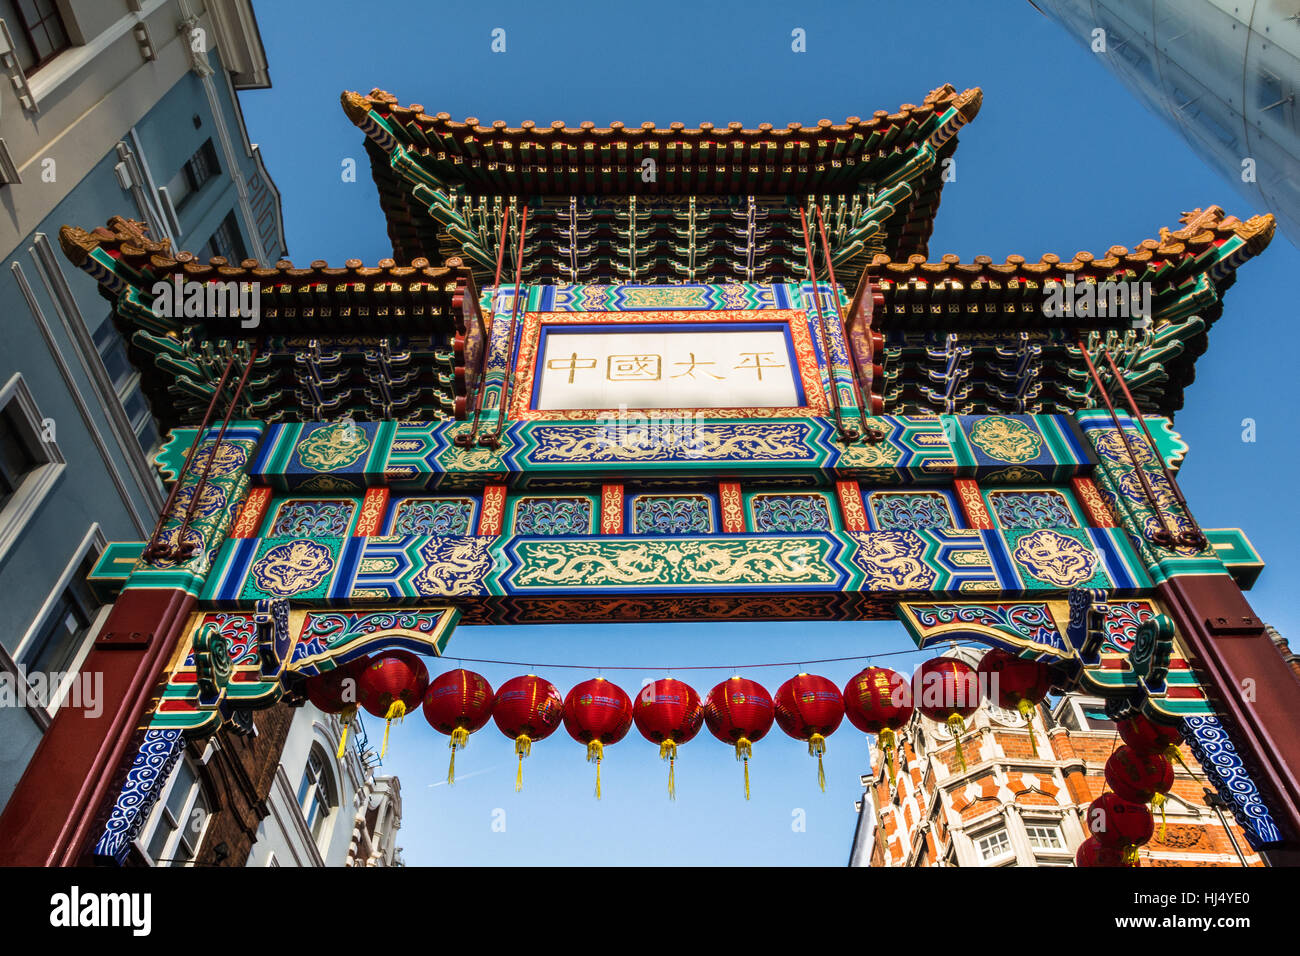 Chinese New Year decorations and celebrations in Chinatown, London, UK Stock Photo